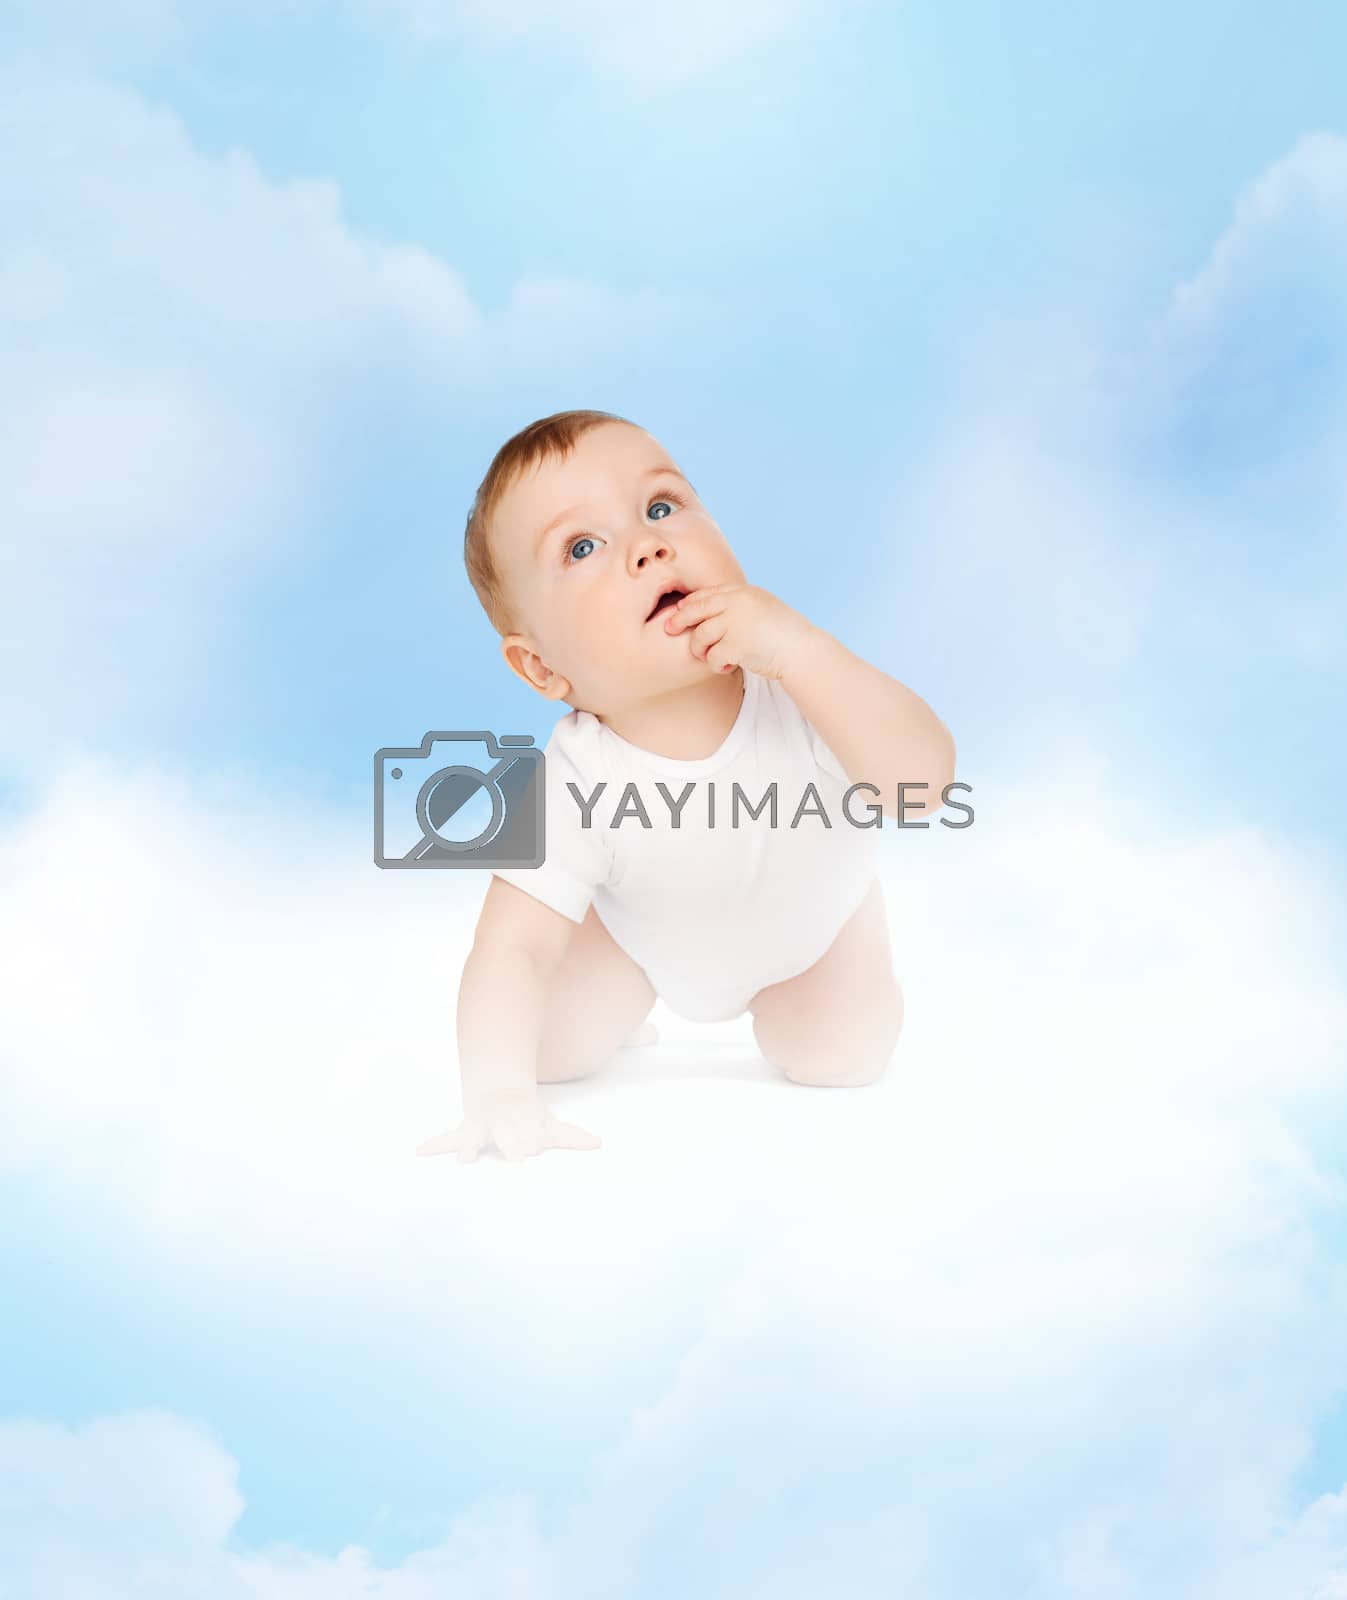 Royalty free image of crawling curious baby looking up by dolgachov